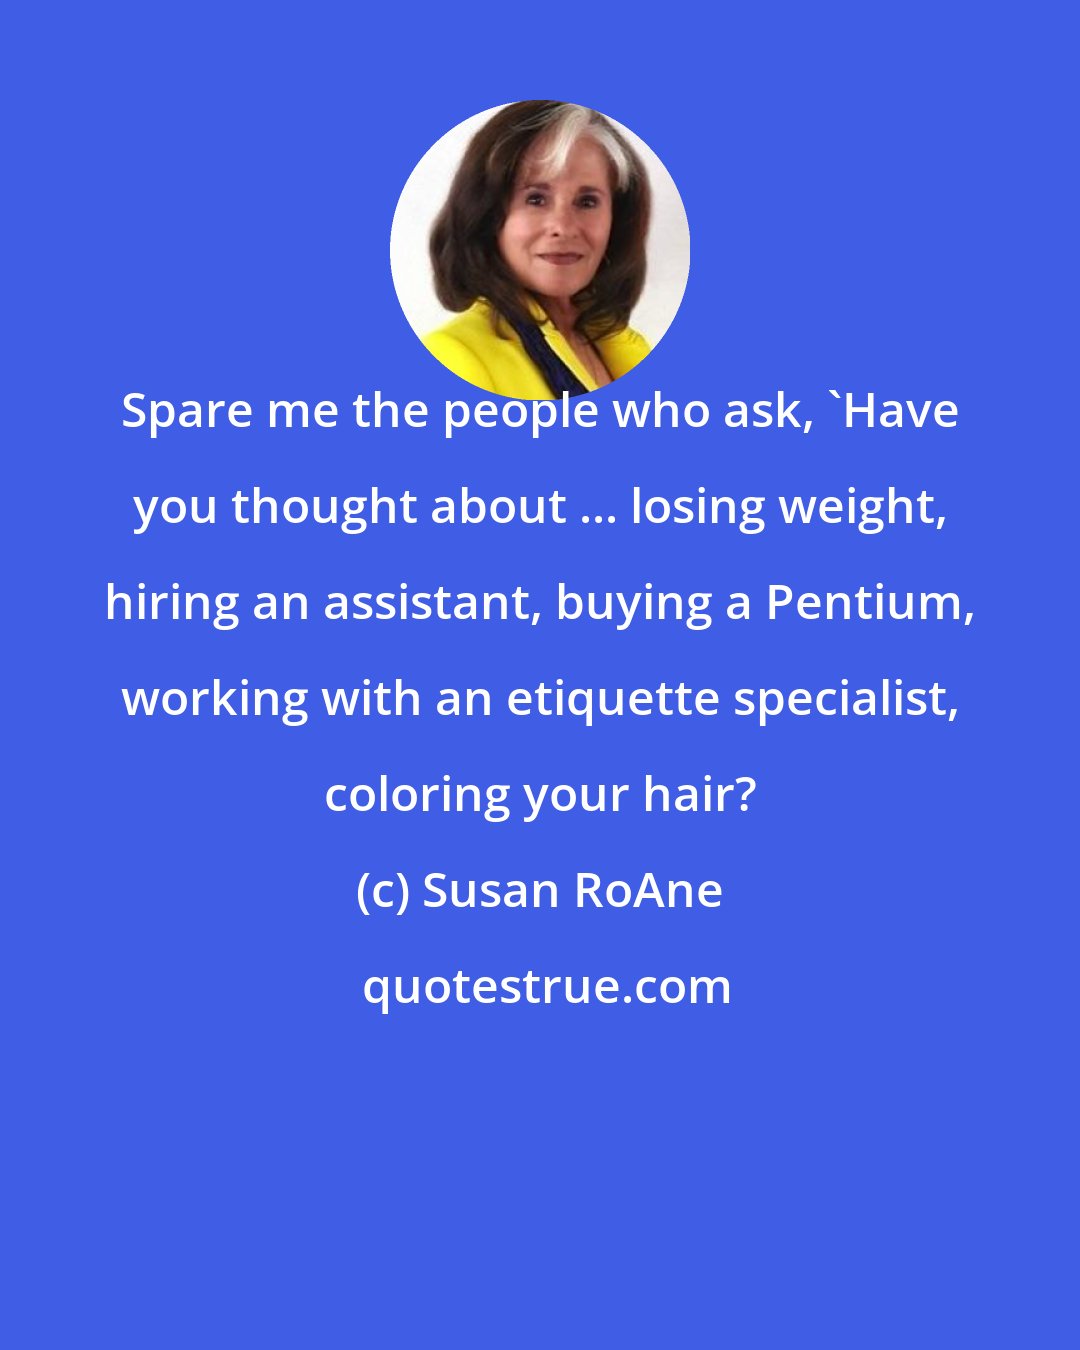 Susan RoAne: Spare me the people who ask, 'Have you thought about ... losing weight, hiring an assistant, buying a Pentium, working with an etiquette specialist, coloring your hair?